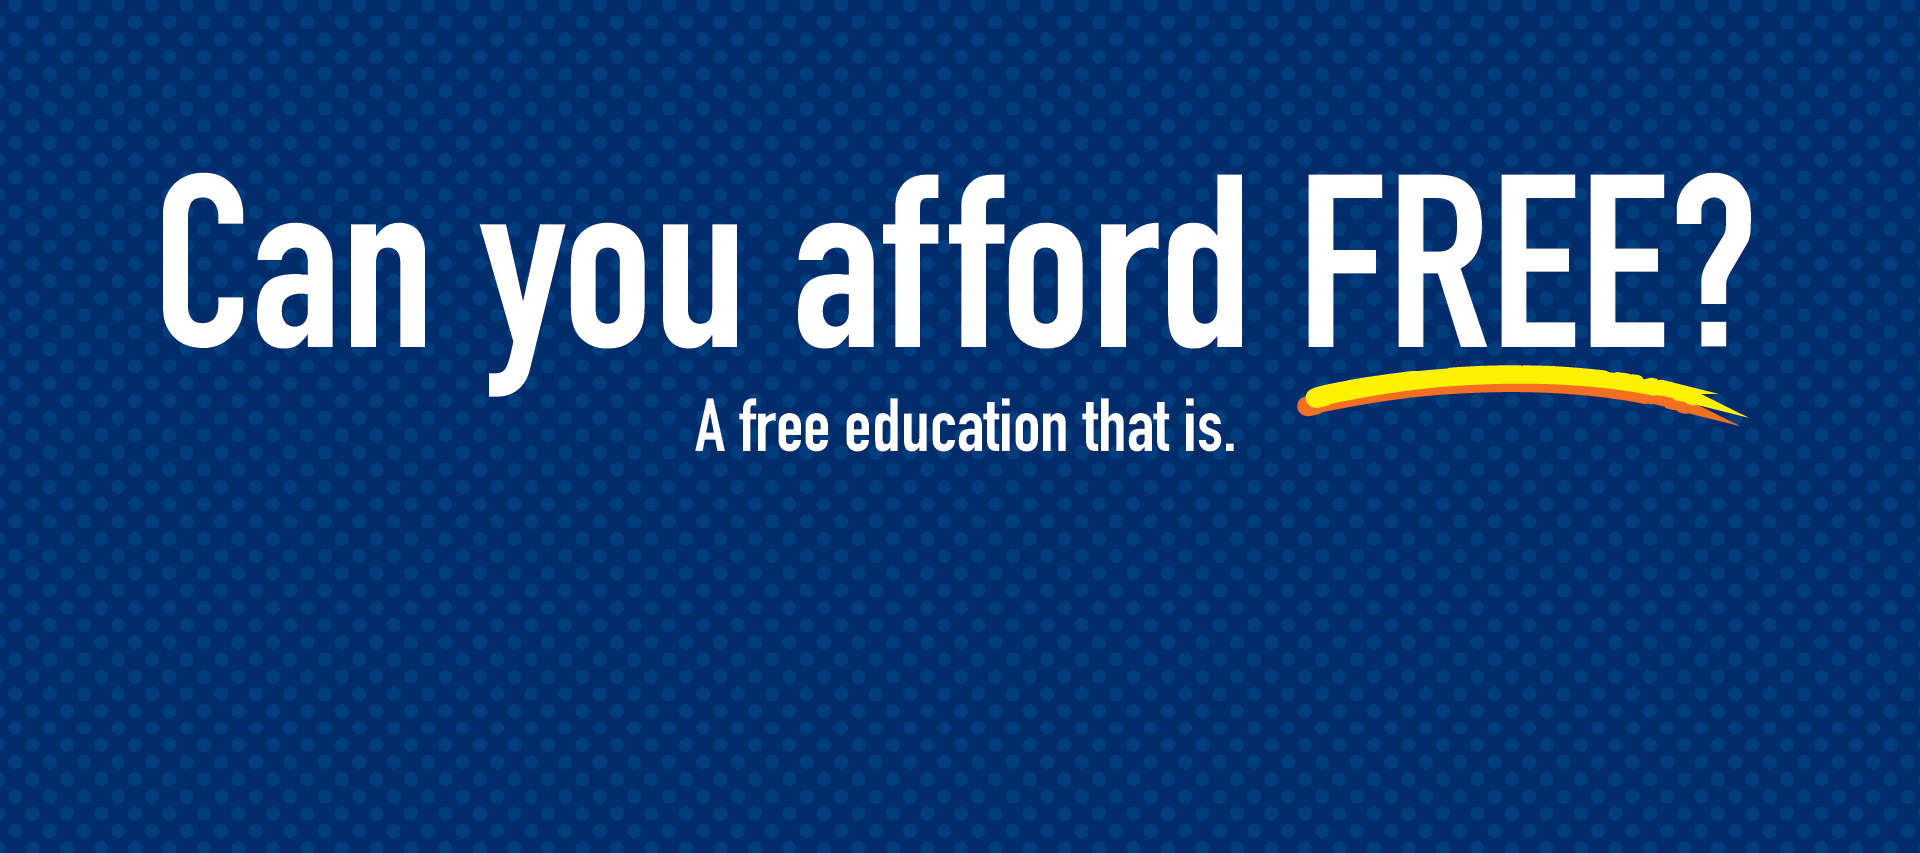 Text: Can you afford free? A free education that is.